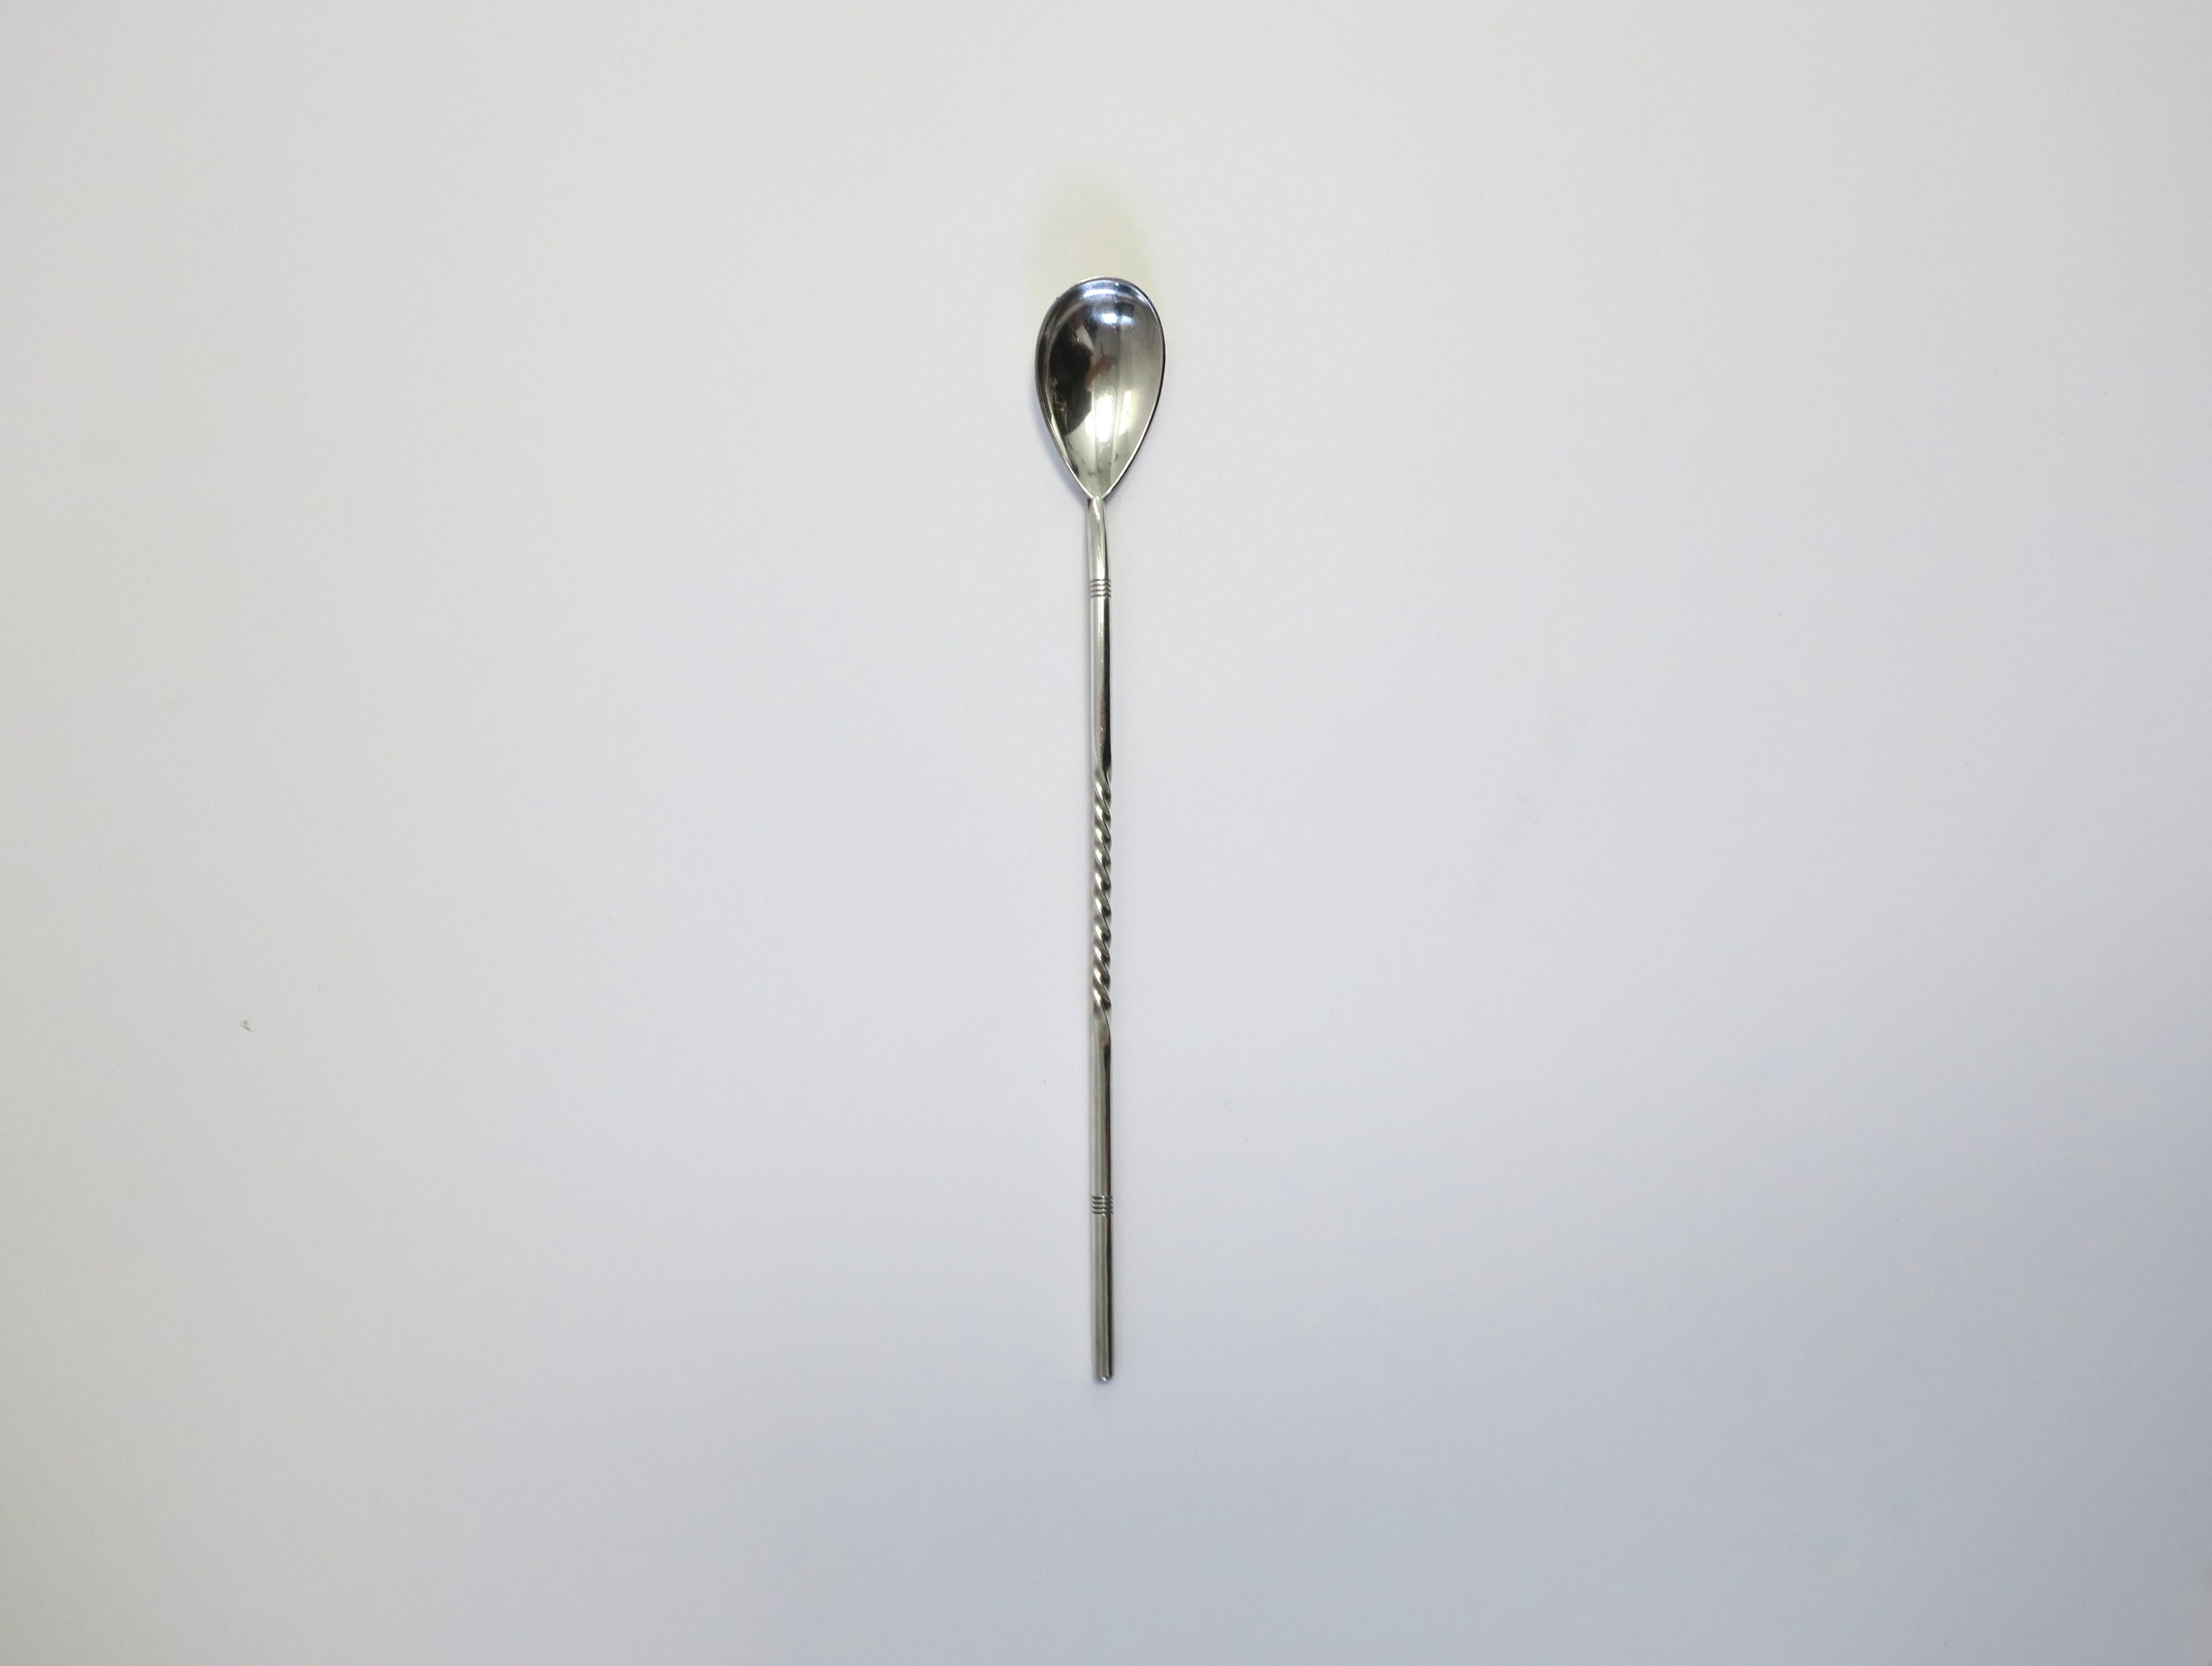 A solid sterling silver cocktail stirrer and spoon with twist detail, Midcentury Modern period, by Gorham Co., circa mid-20th century, USA. A great vintage sterling silver barware piece for any bar, bartender, mixologist, etc. Makers' mark on